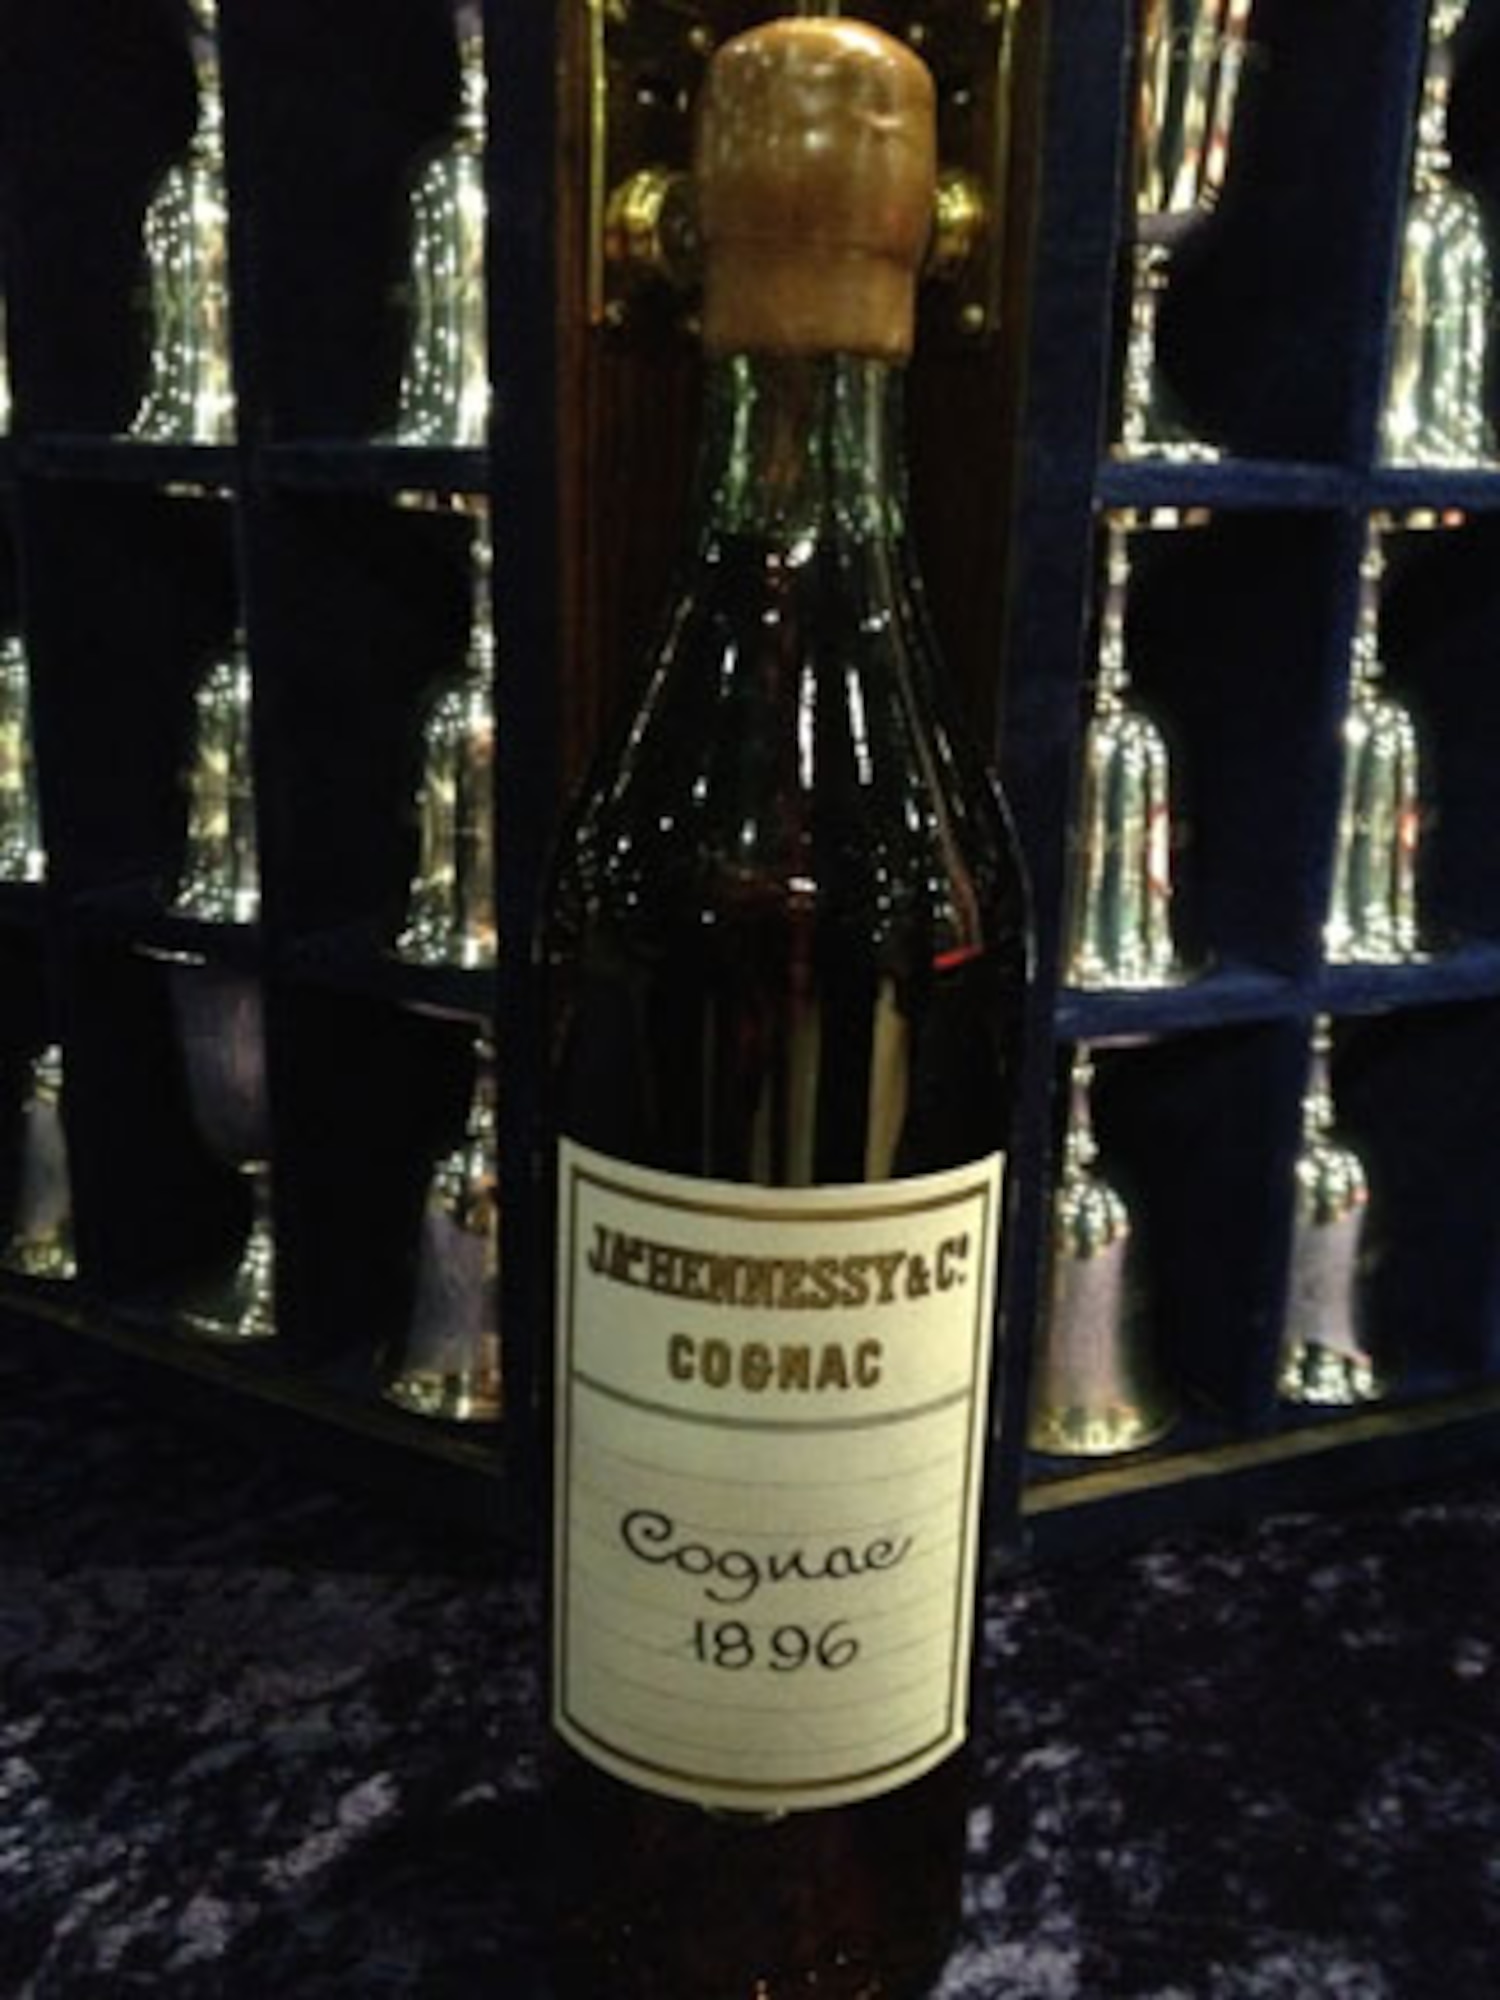 Replica of the bottle of the 1896 Hennessy Very Special cognac presented by
the Hennessy Company to General Doolittle, who was born in 1896.  This
replica is currently on display with the Doolittle Raiders' goblets at the
National Museum of the United States Air Force. (U.S. Air Force photo).
